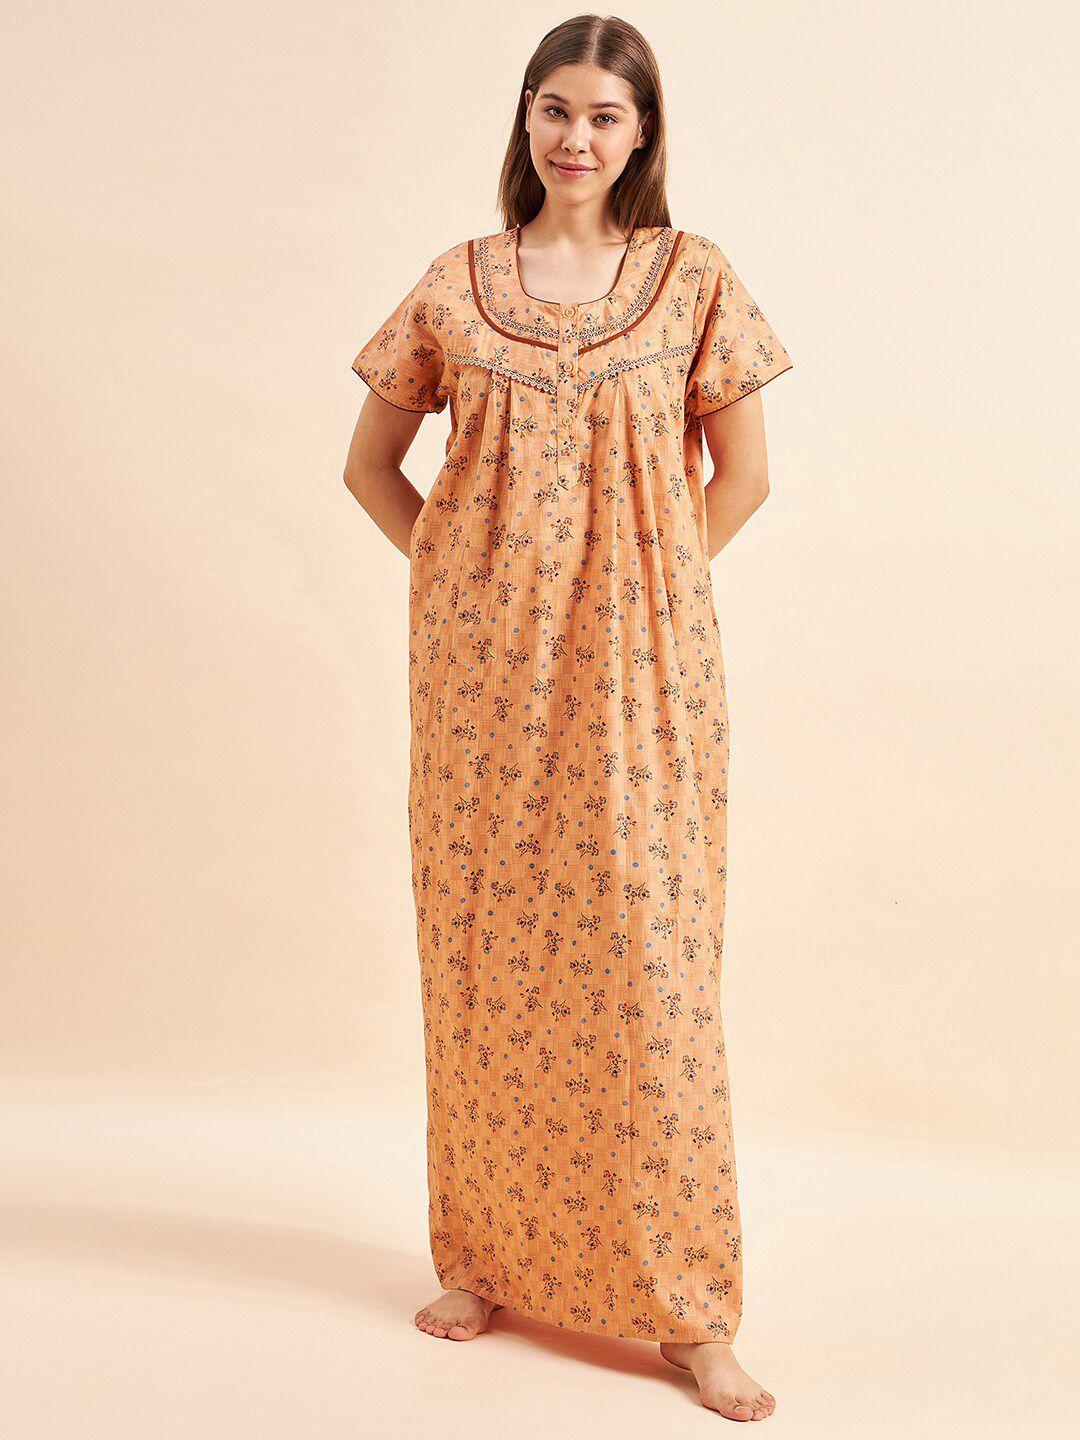 sweet-dreams-orange-floral-printed-pure-cotton-maxi-nightdress